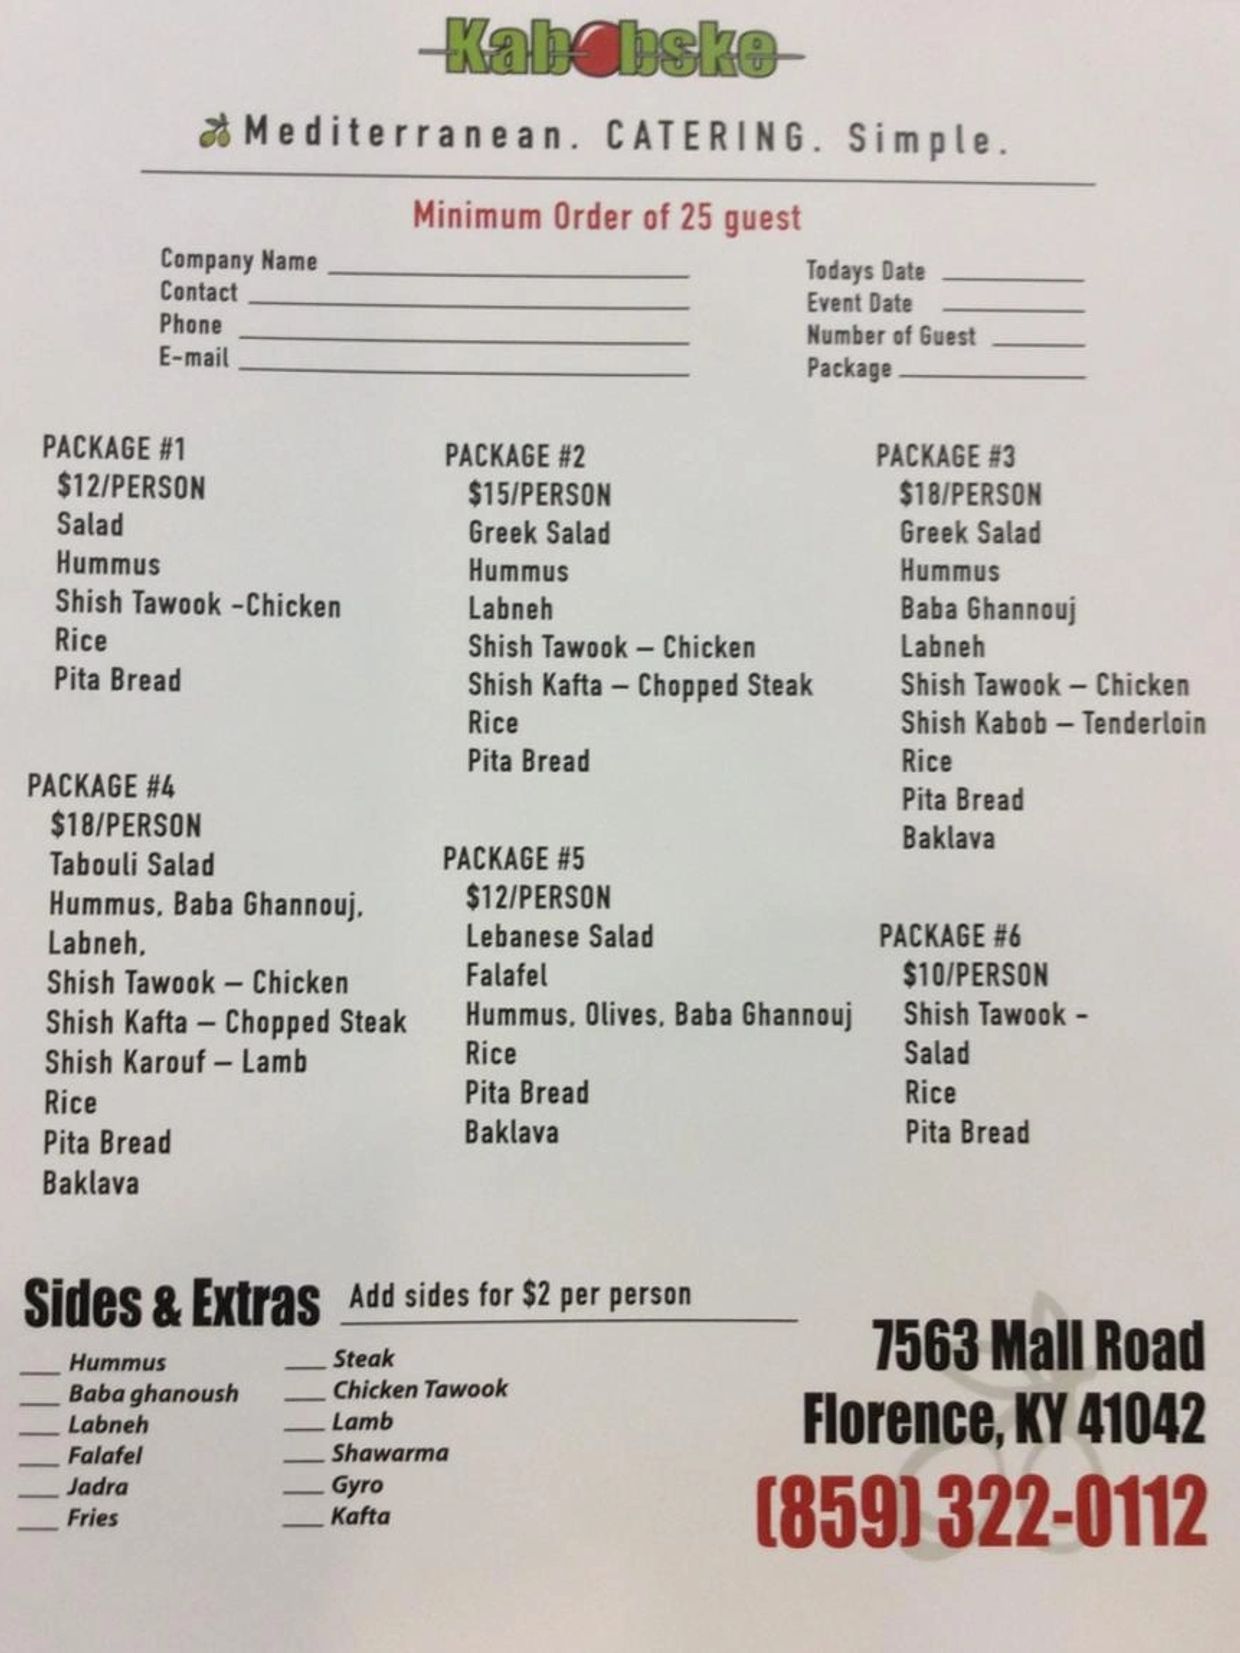 Catering order form